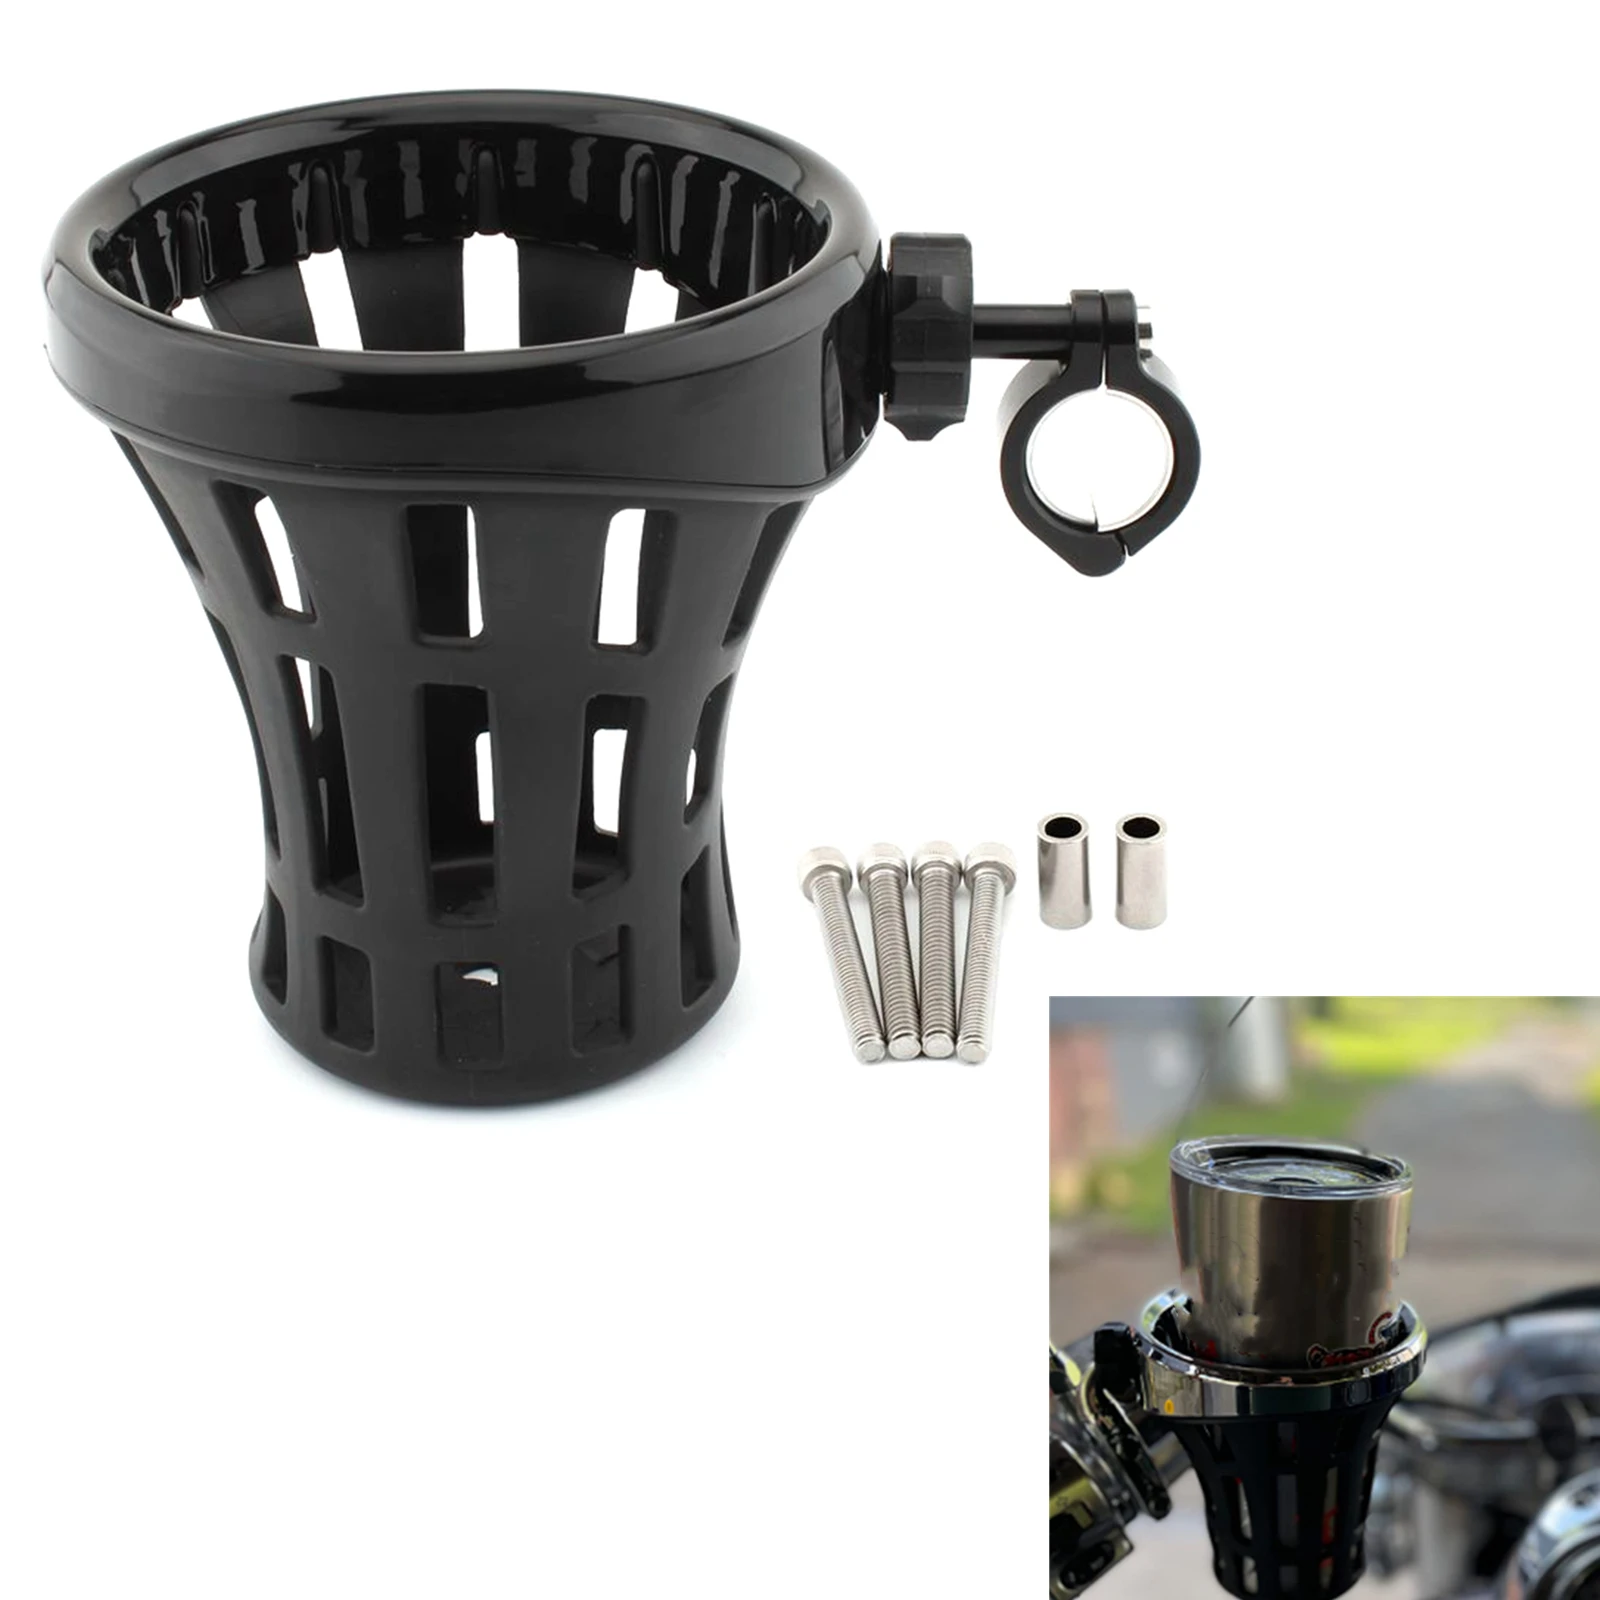 

Fits For 22mm-25mm Modified Fixed Motorcycle Handlebars Drink Water Cup Holder W/ Mesh Basket Mount